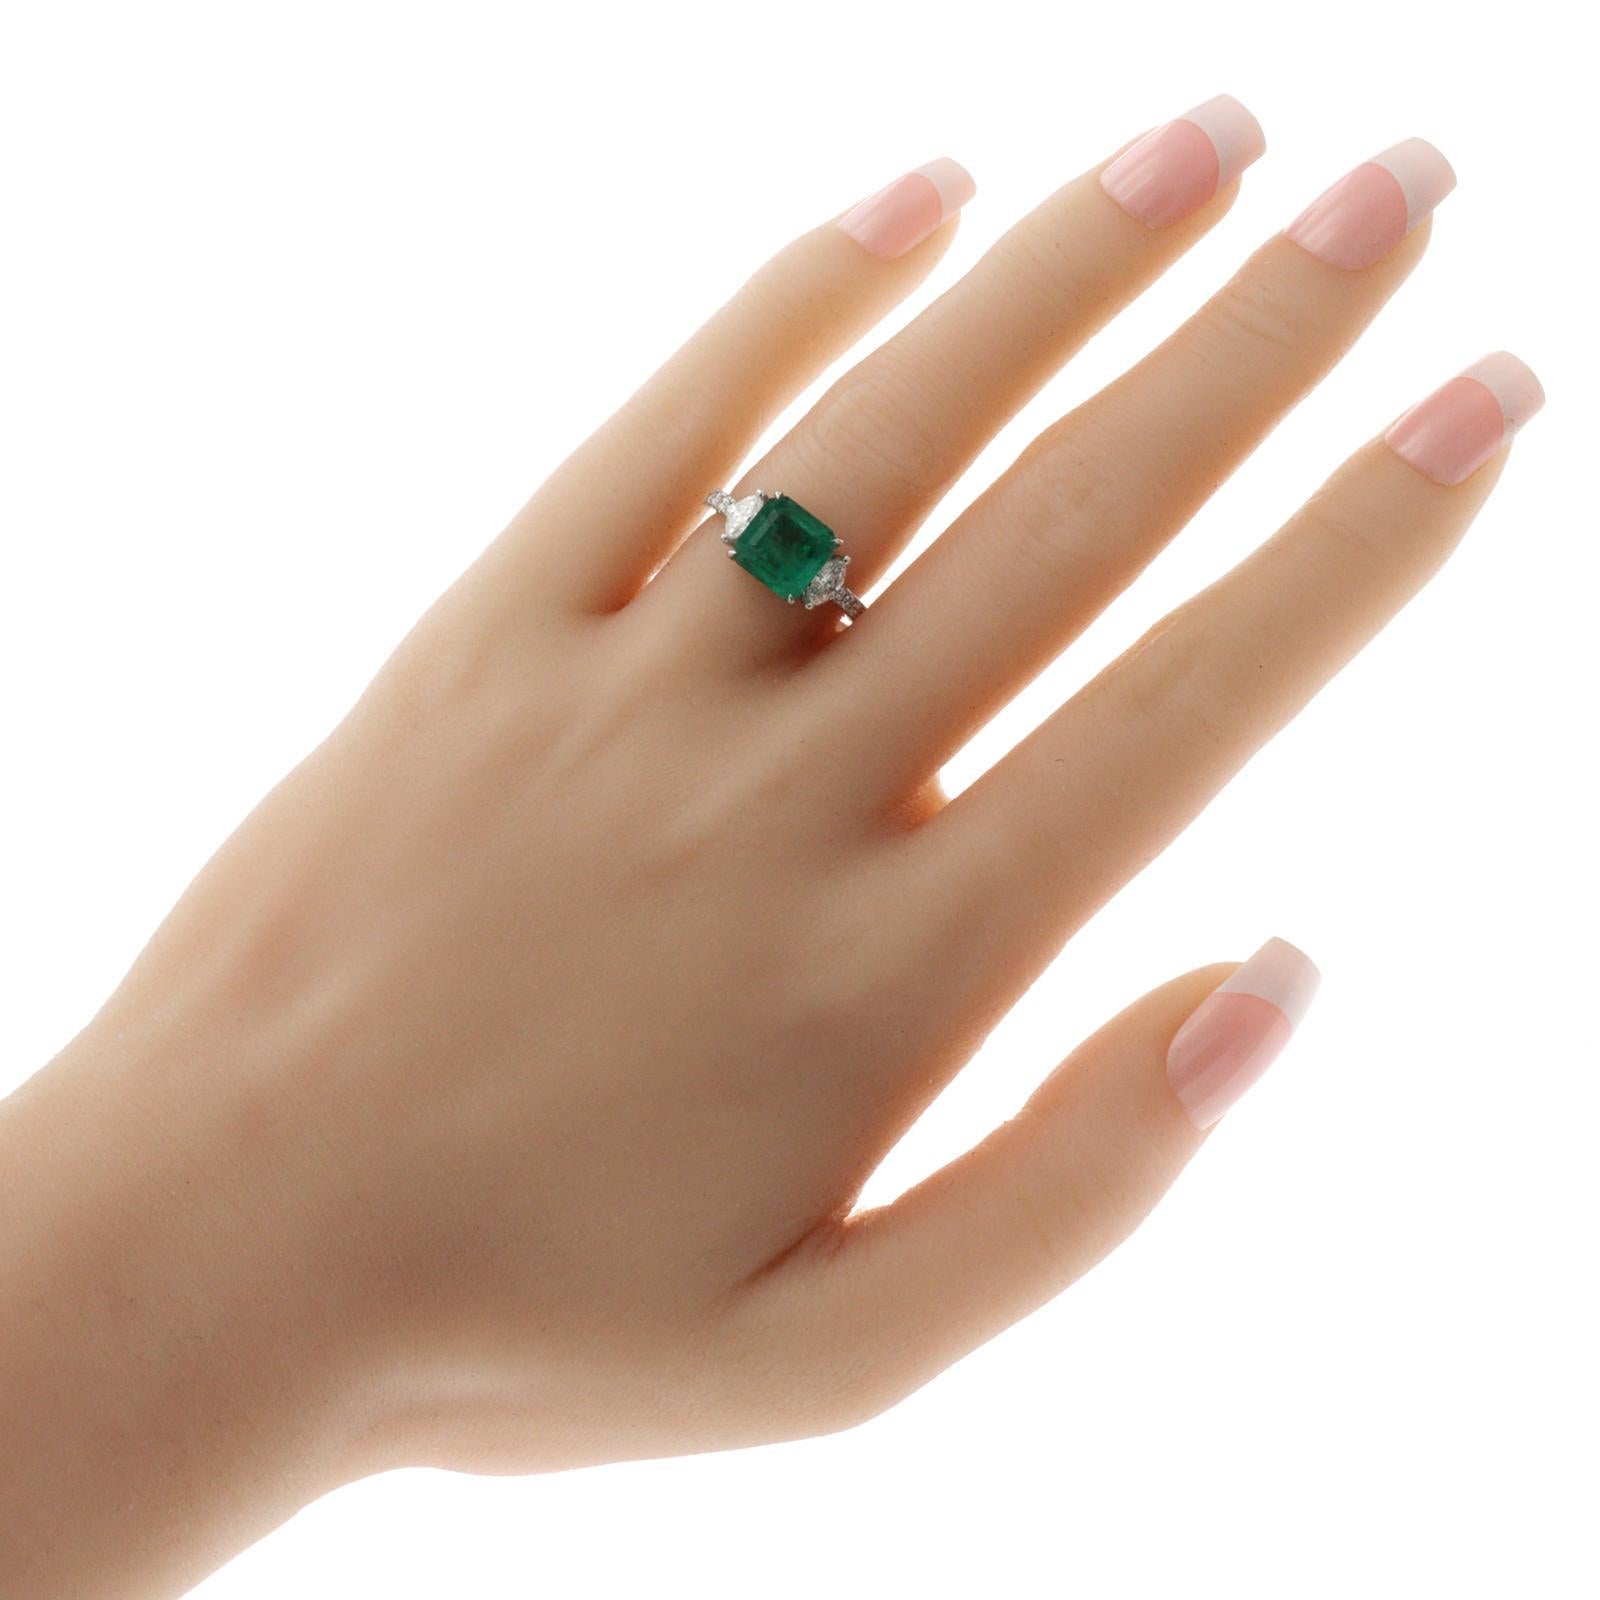 100% Authentic, 100% Customer Satisfaction

Top: 8.6 mm

Band Width:  mm

Metal: 14K White Gold 

Size: 6-8 ( Please message Us for your Size )

Hallmarks: 14K

Total Weight: 3.7 Grams

Stone Type:  2.79 CT Natural Emerald & 0.54 G SI-VS2 CT